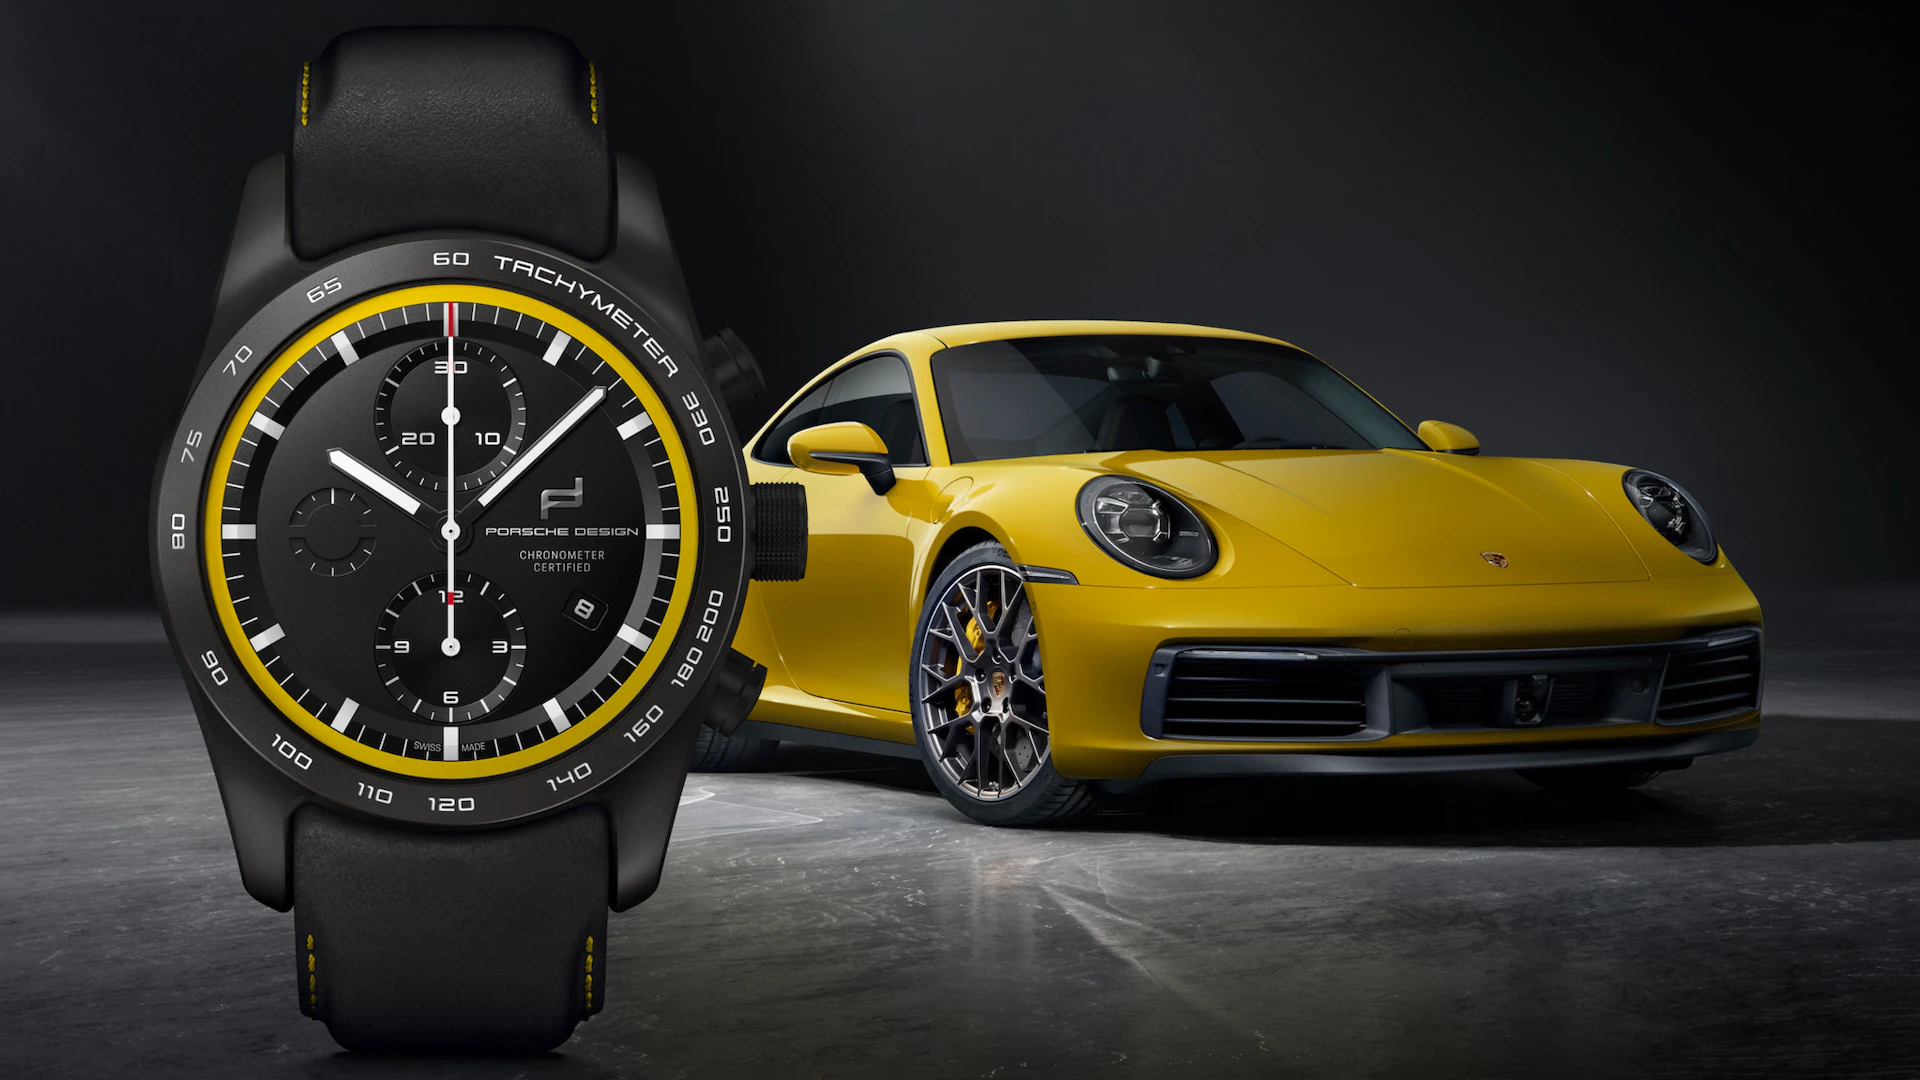 The Next Best Thing to a Game-Changing Porsche? A Watch Inspired